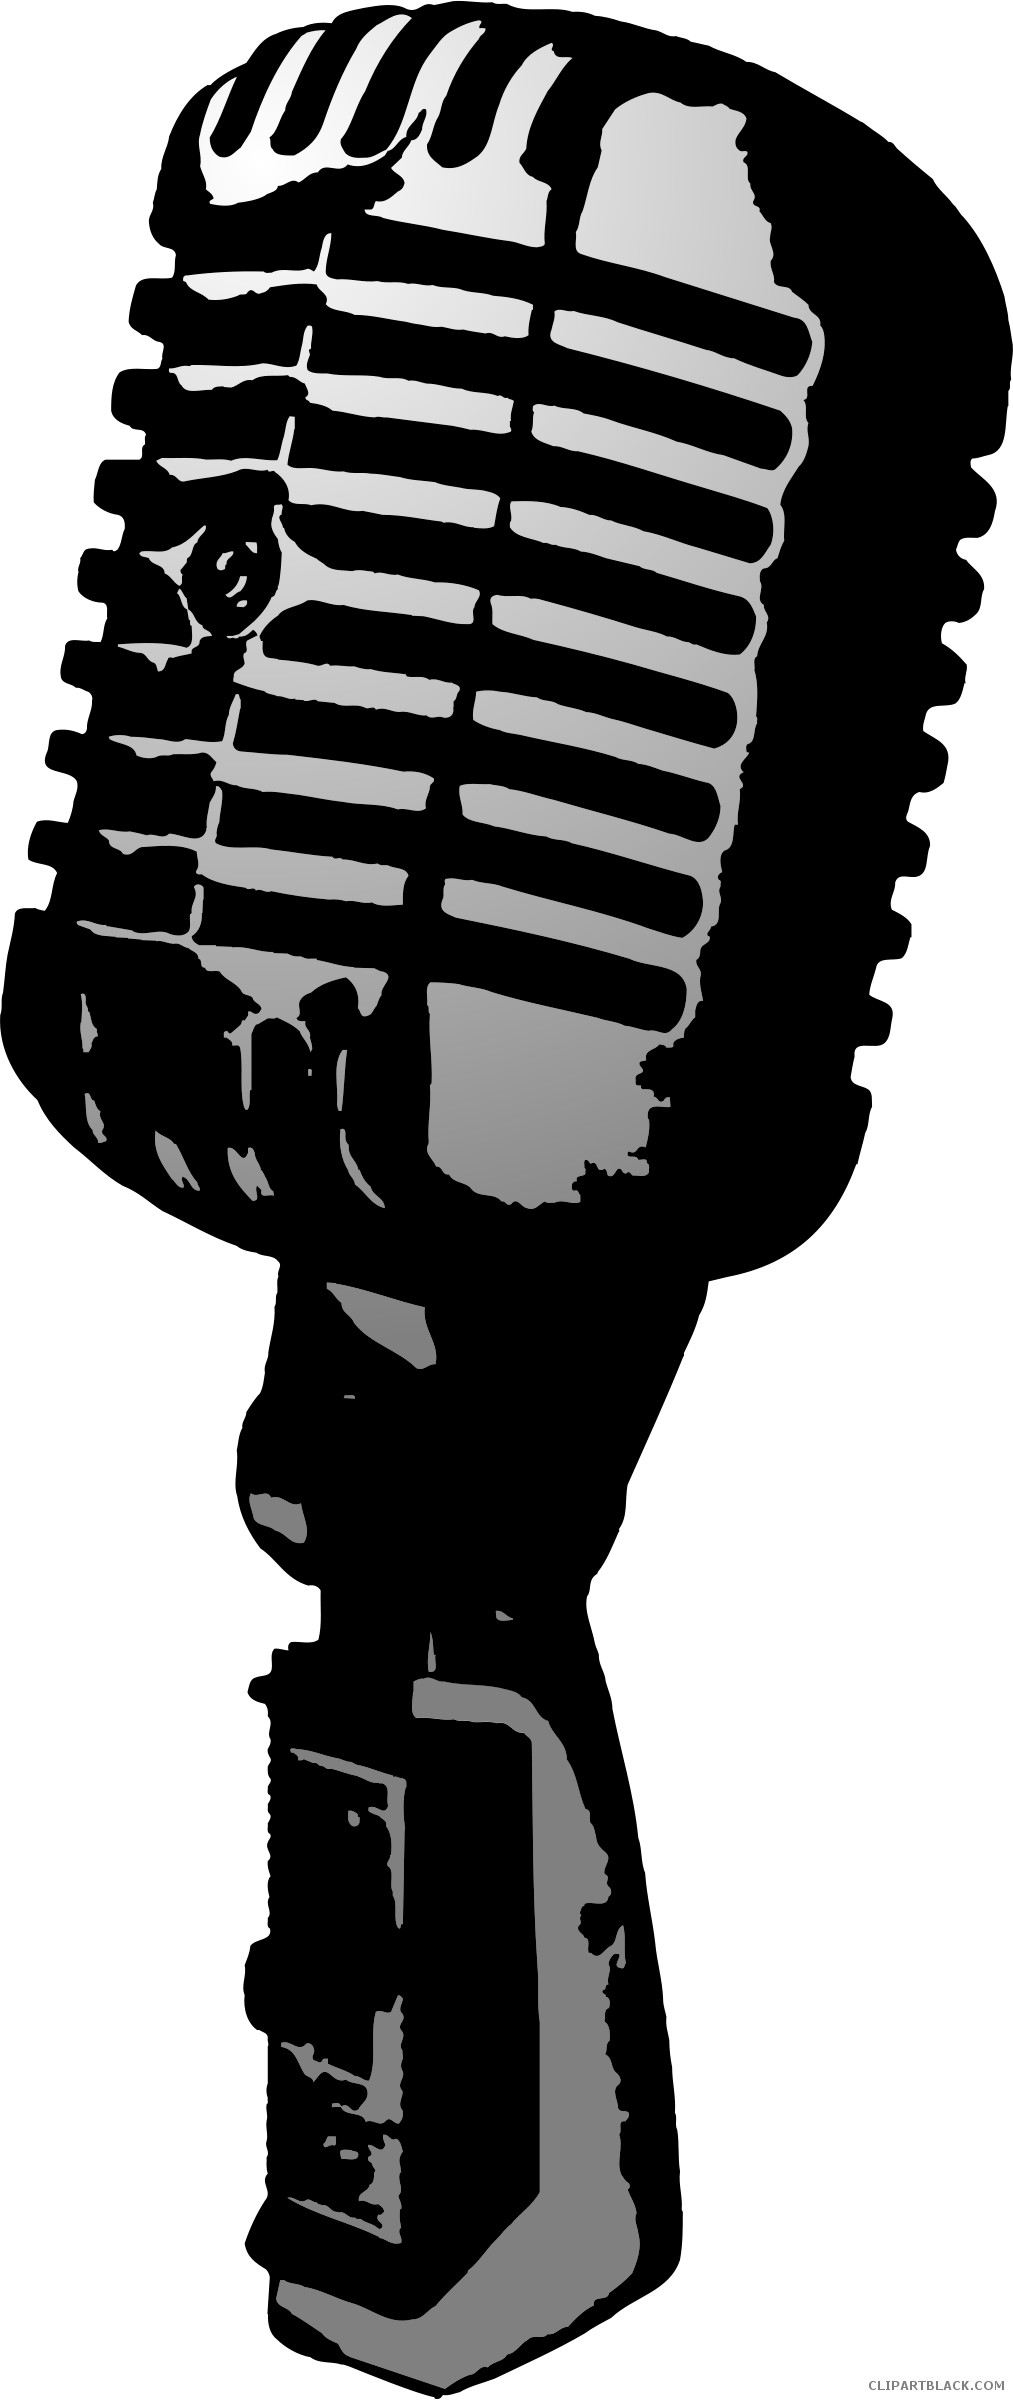 Microphone clipart old style, Microphone old style